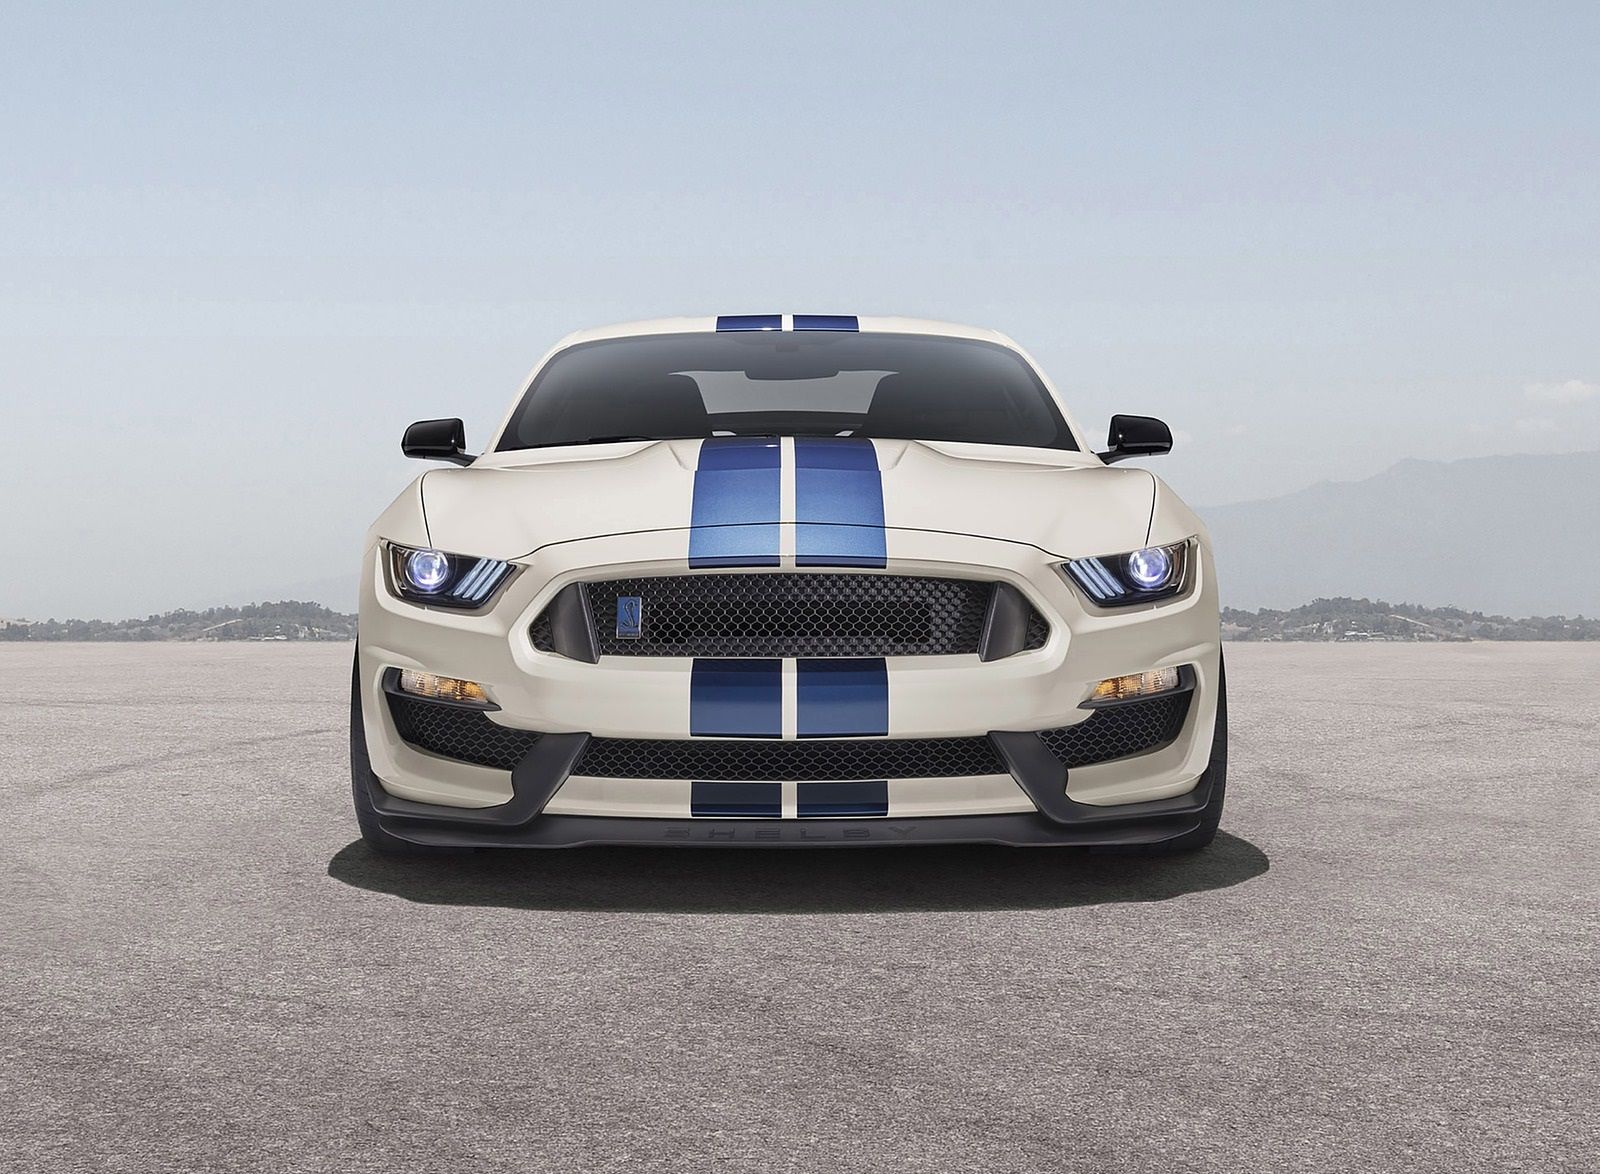 Ford Mustang Shelby GT350 Wallpaper (HD Image)